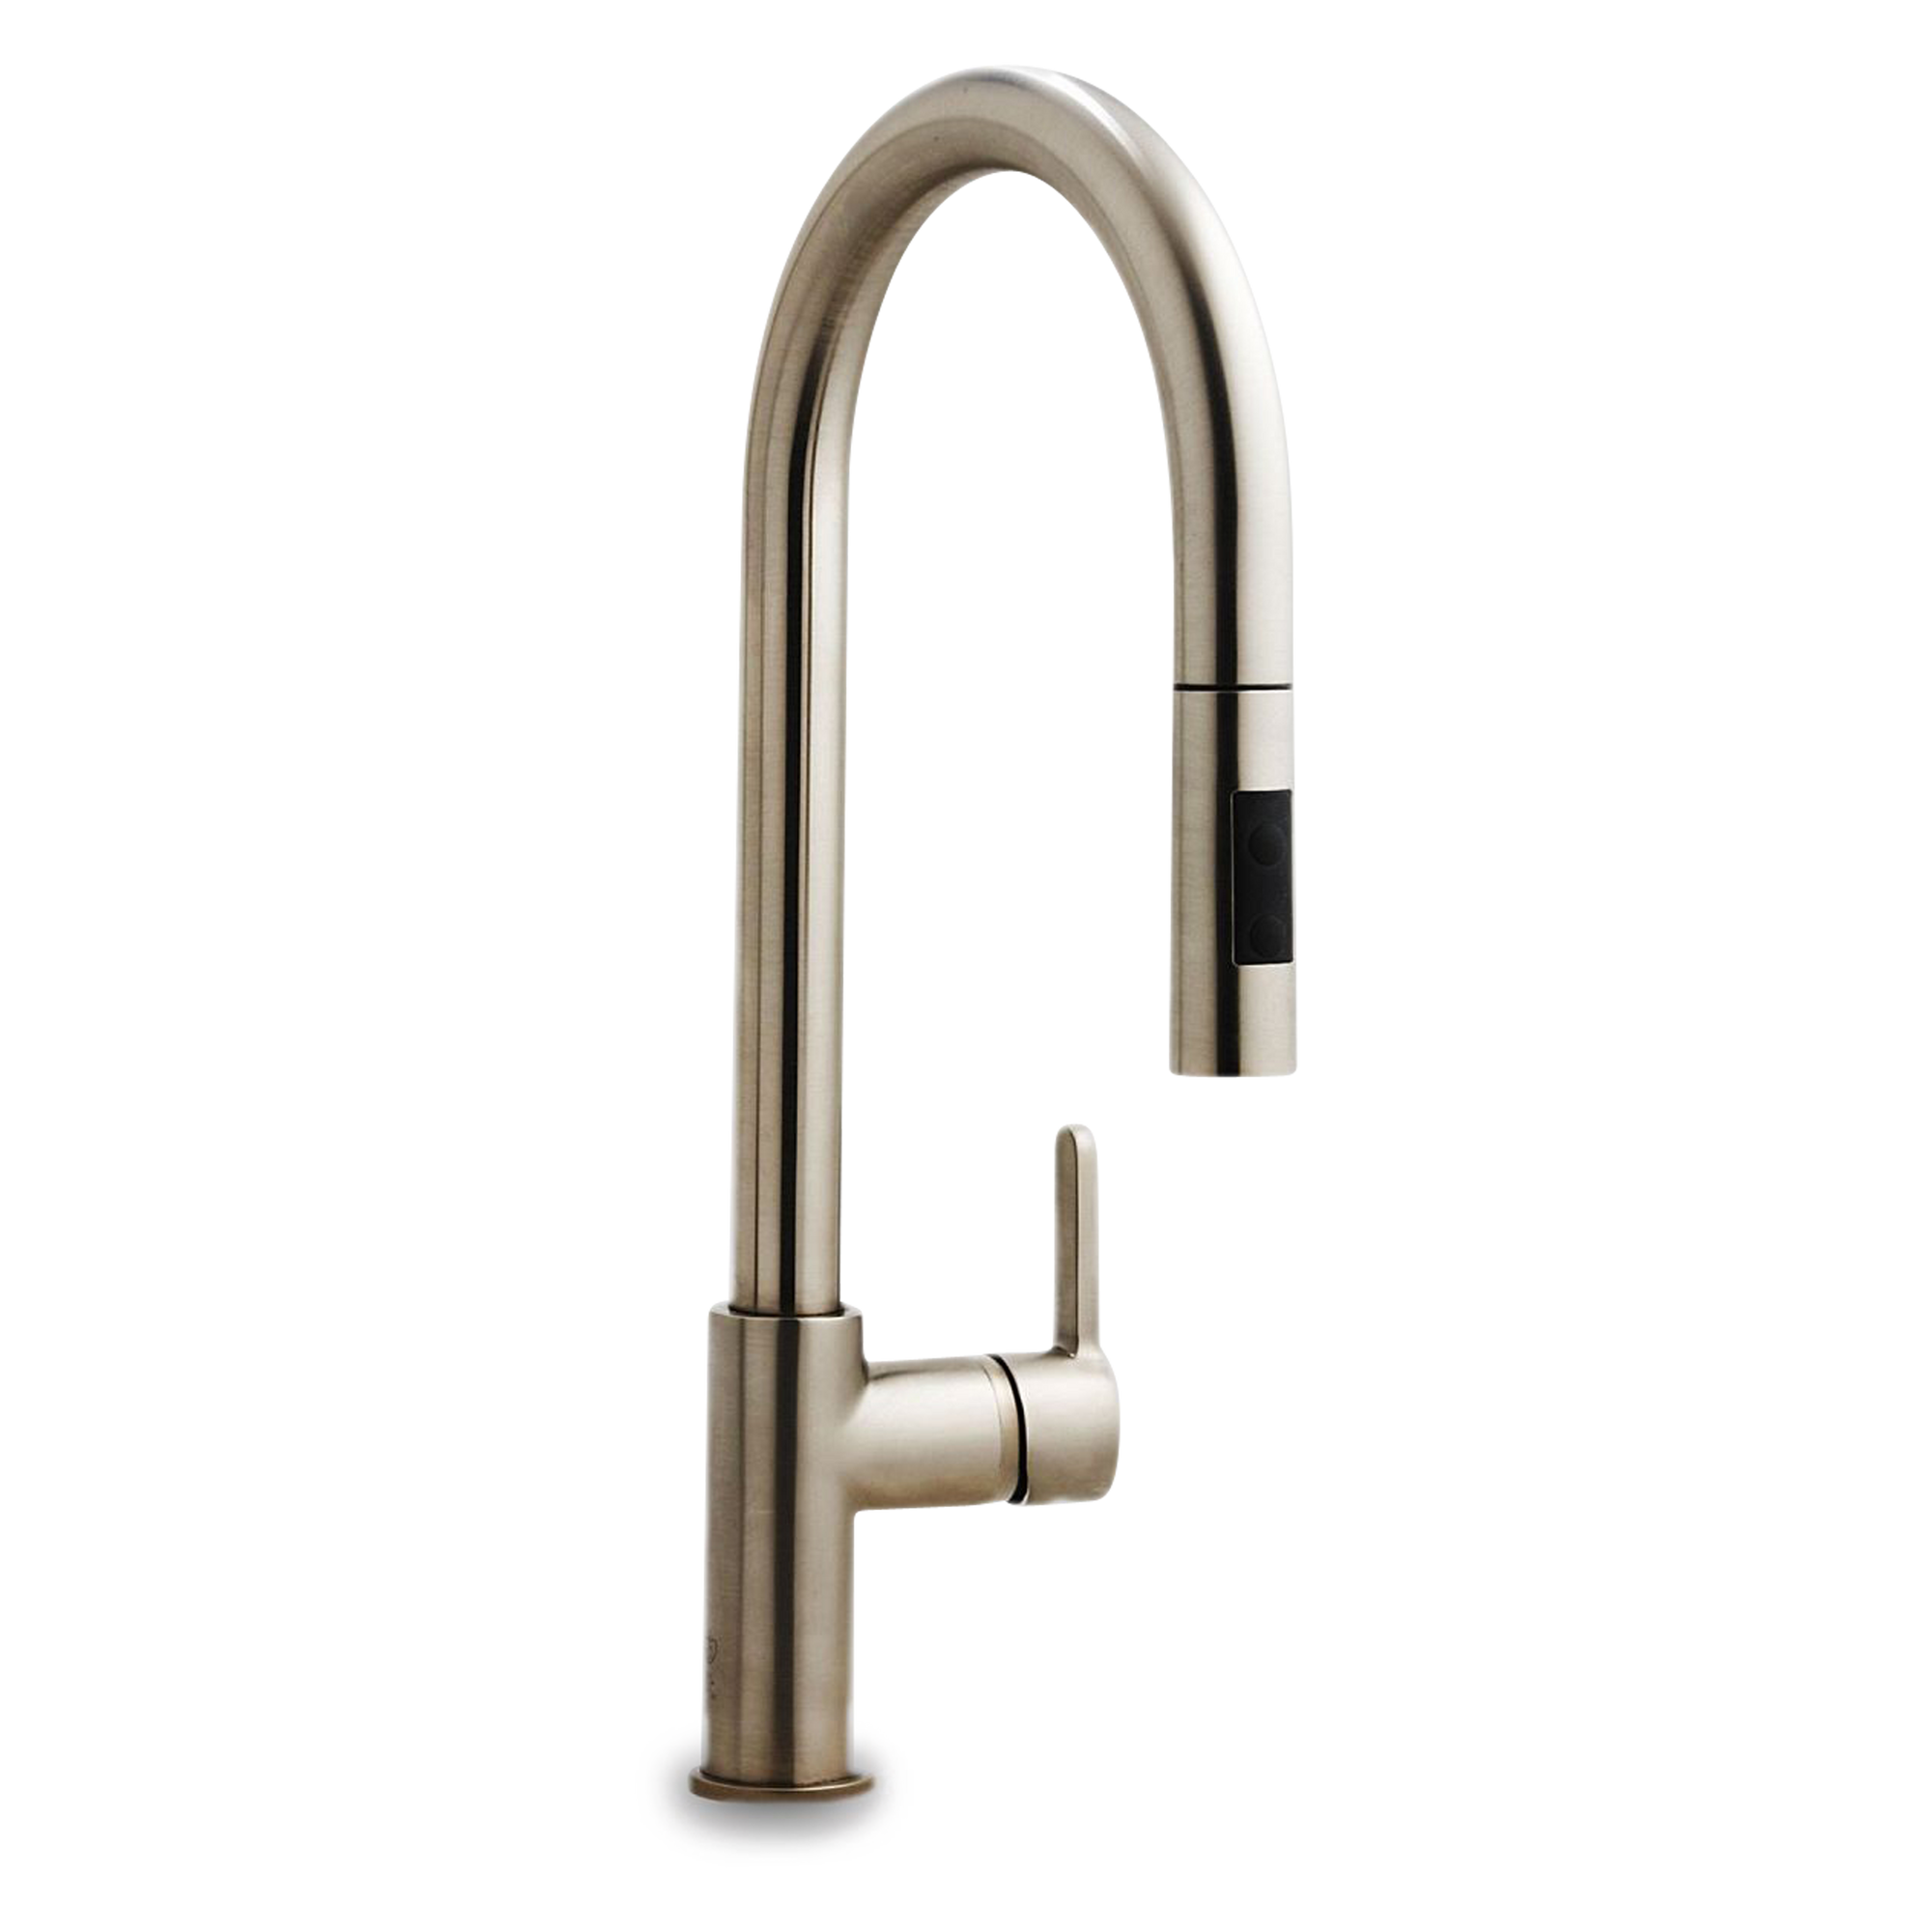 The Kelly 2 Faucet (Pull-Down) is a single hole kitchen faucet with one lever and a pull-down spray.